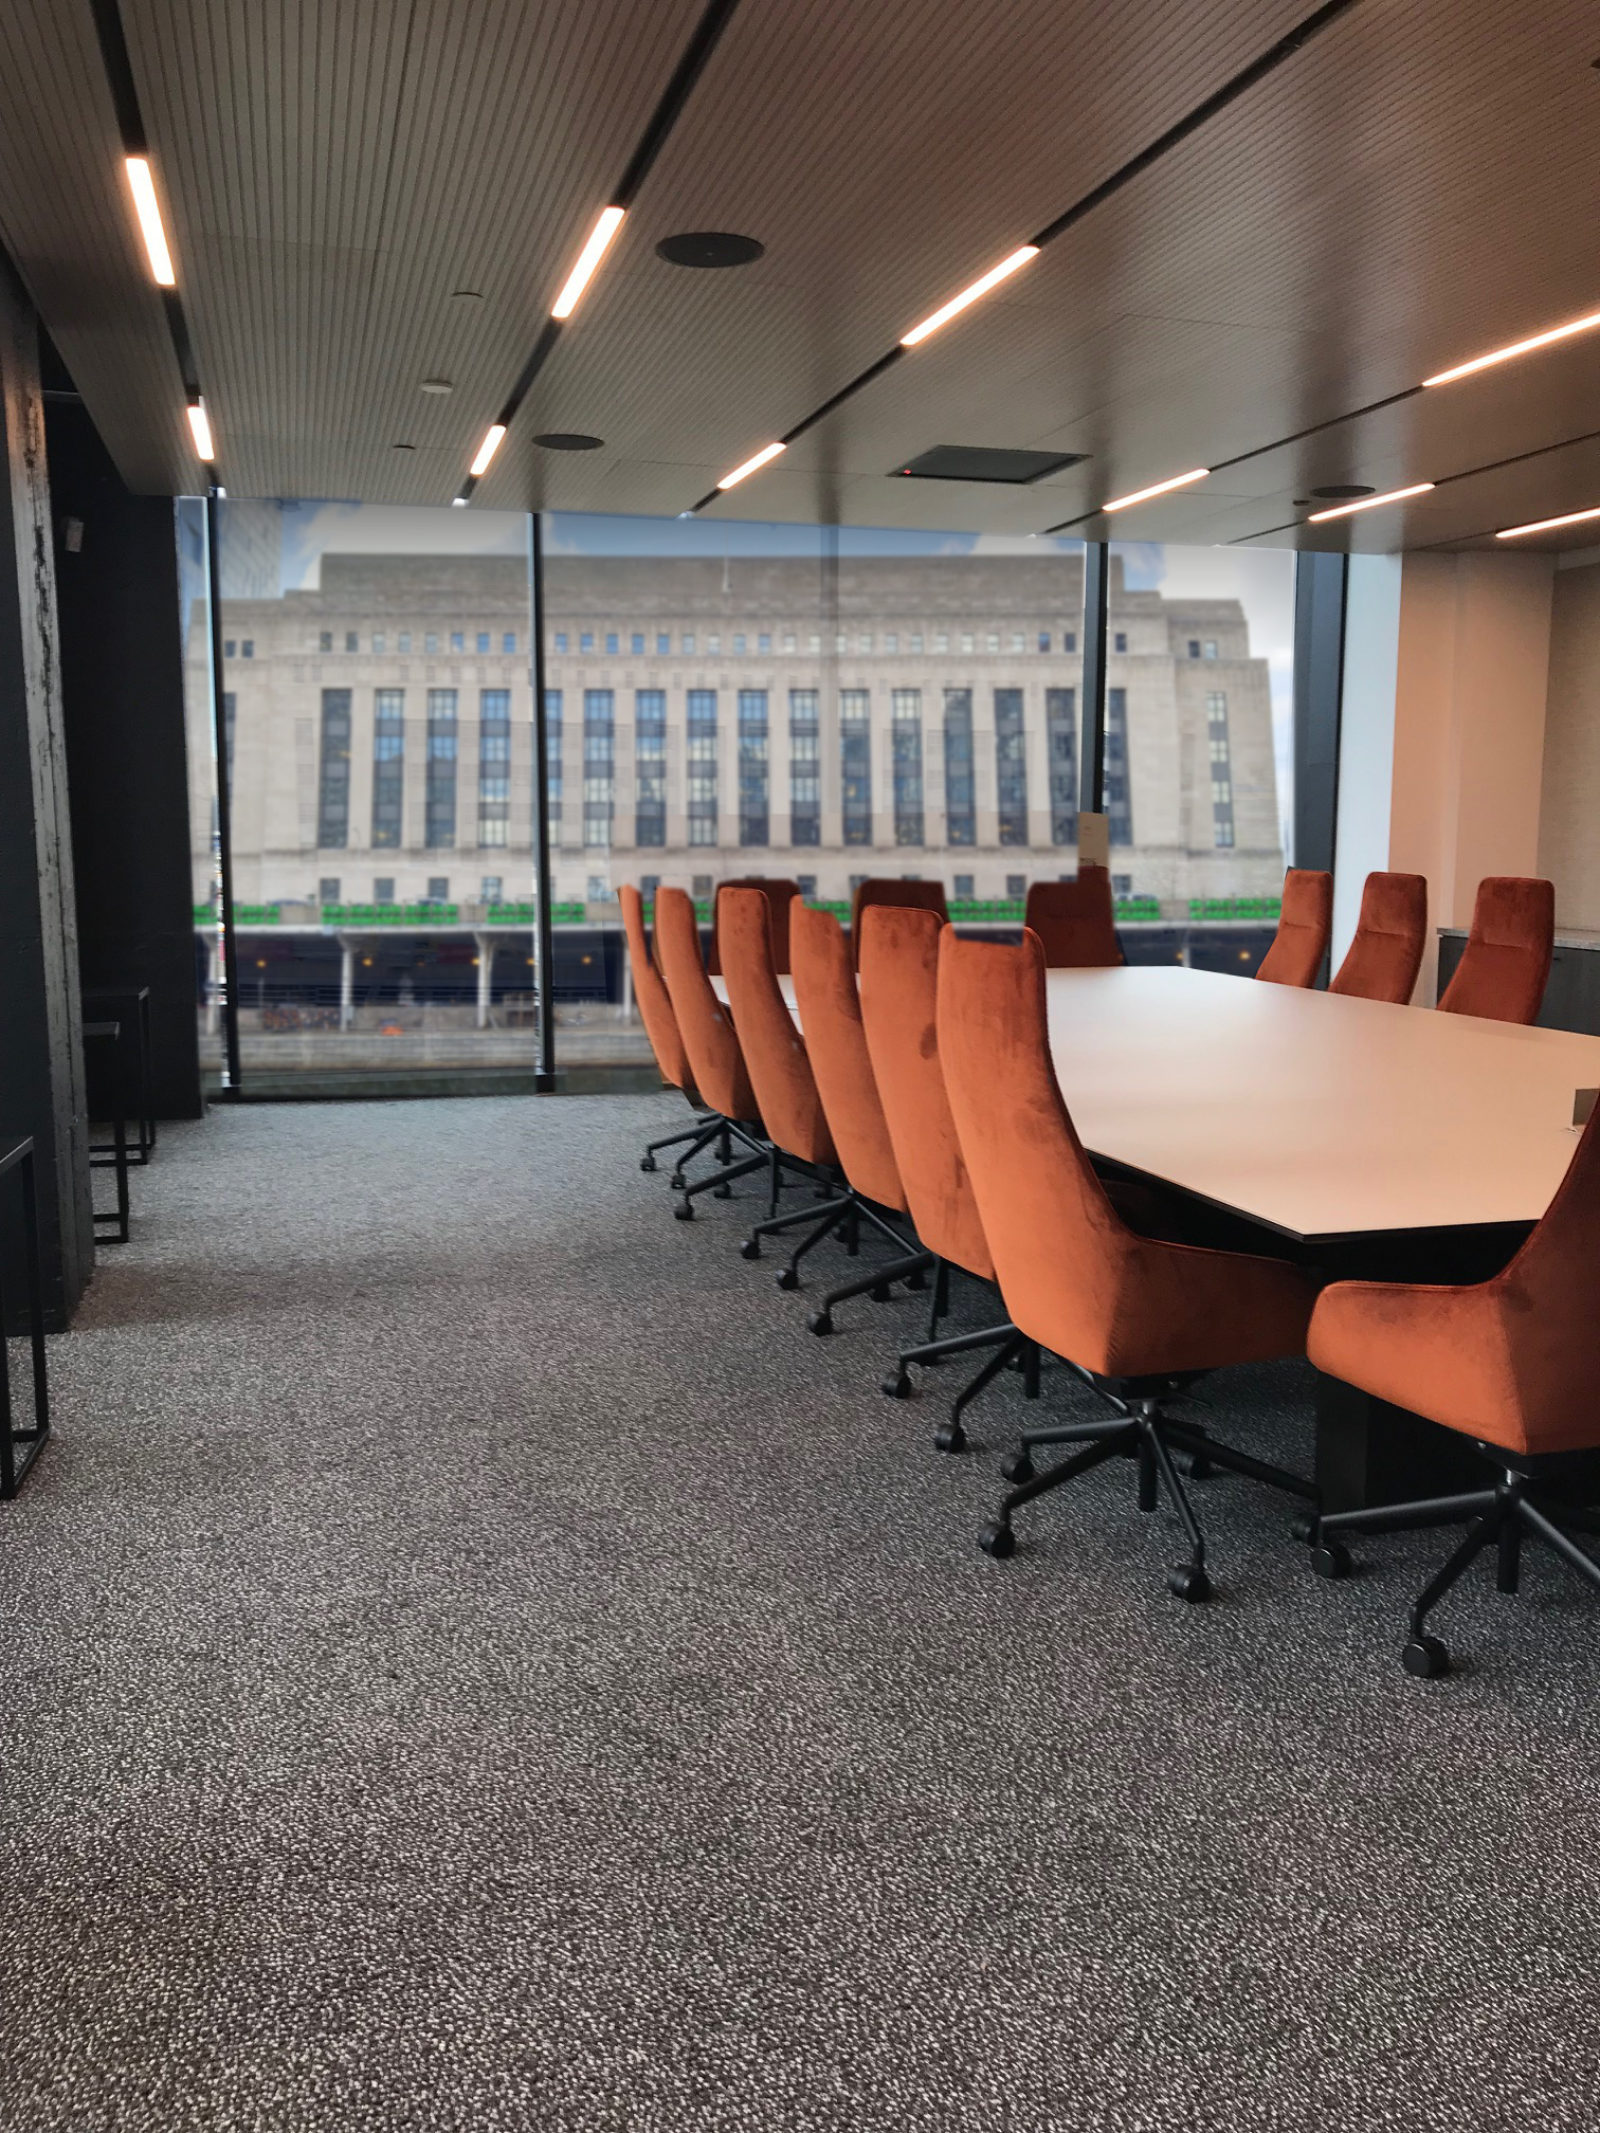 Conference room with burnt orange velvet chairs and a white table. View of the city in the background in the full-size windows.